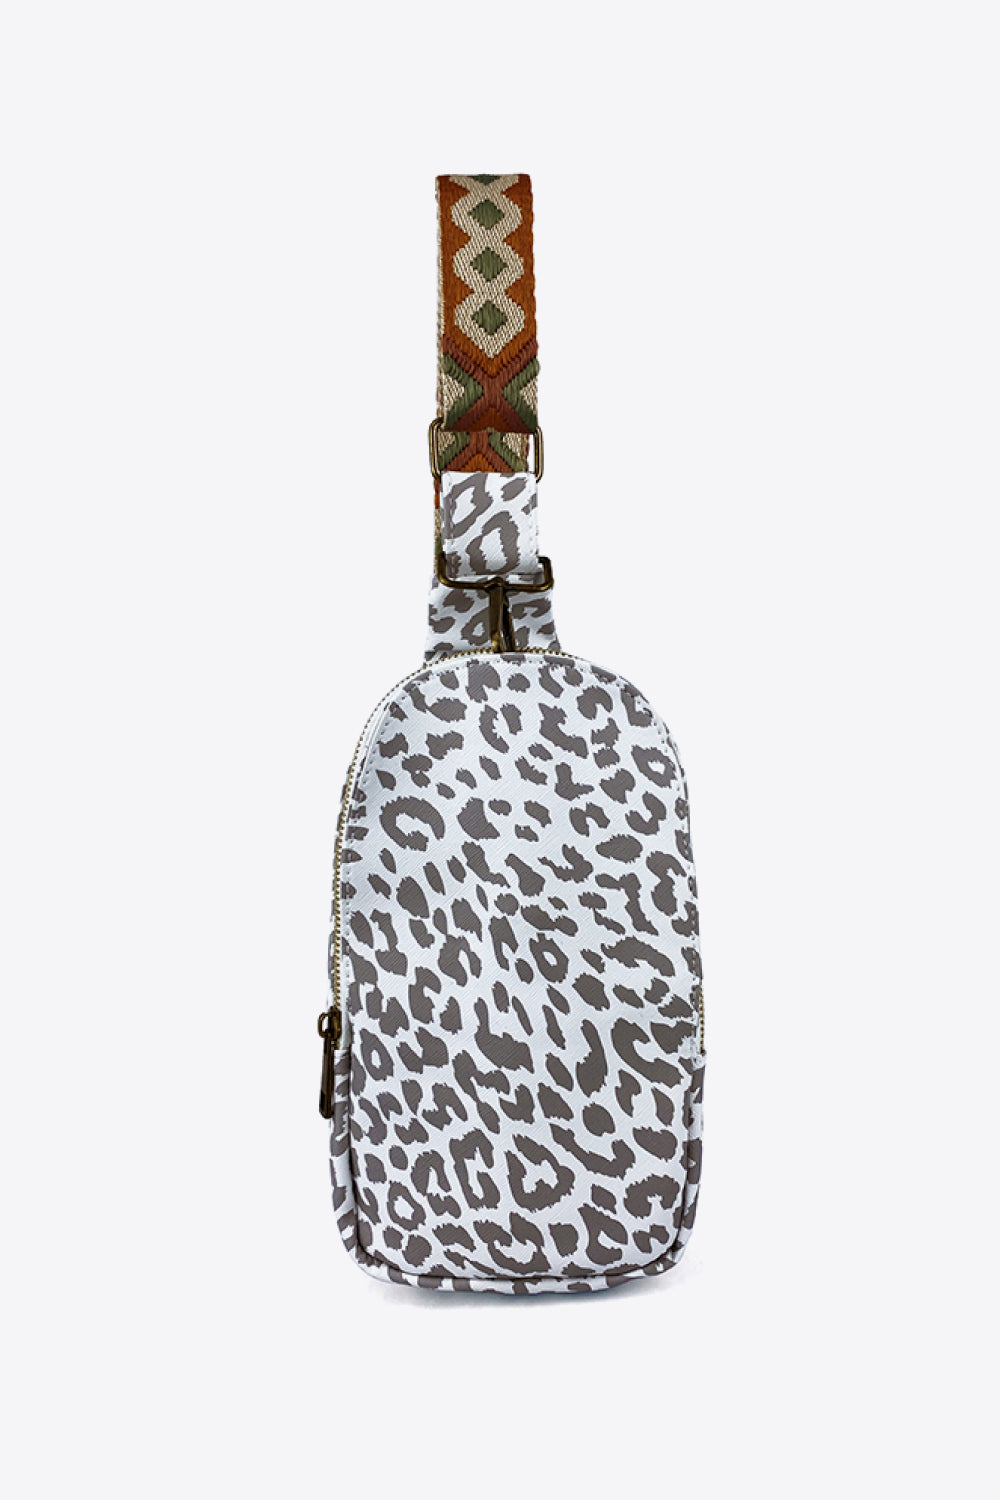 Printed PU Leather Sling Bag - BEAUTY COSMOTICS SHOP